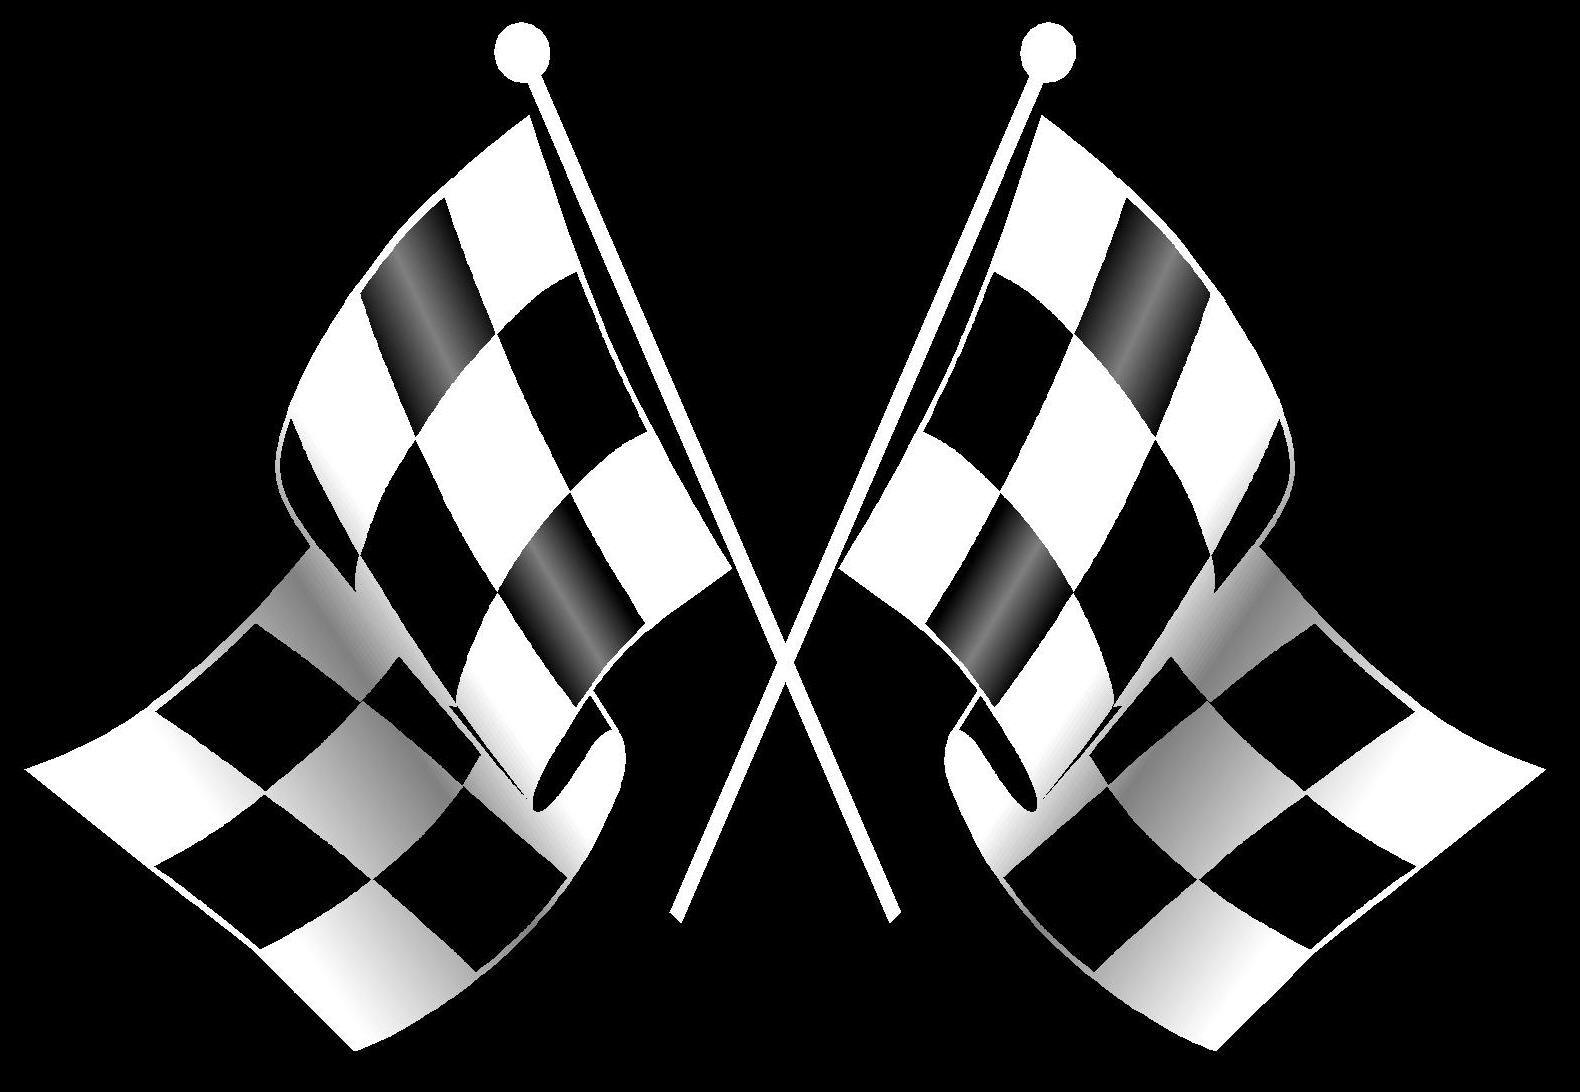 Checkered Flag   Free Images At Clker Com   Vector Clip Art Online